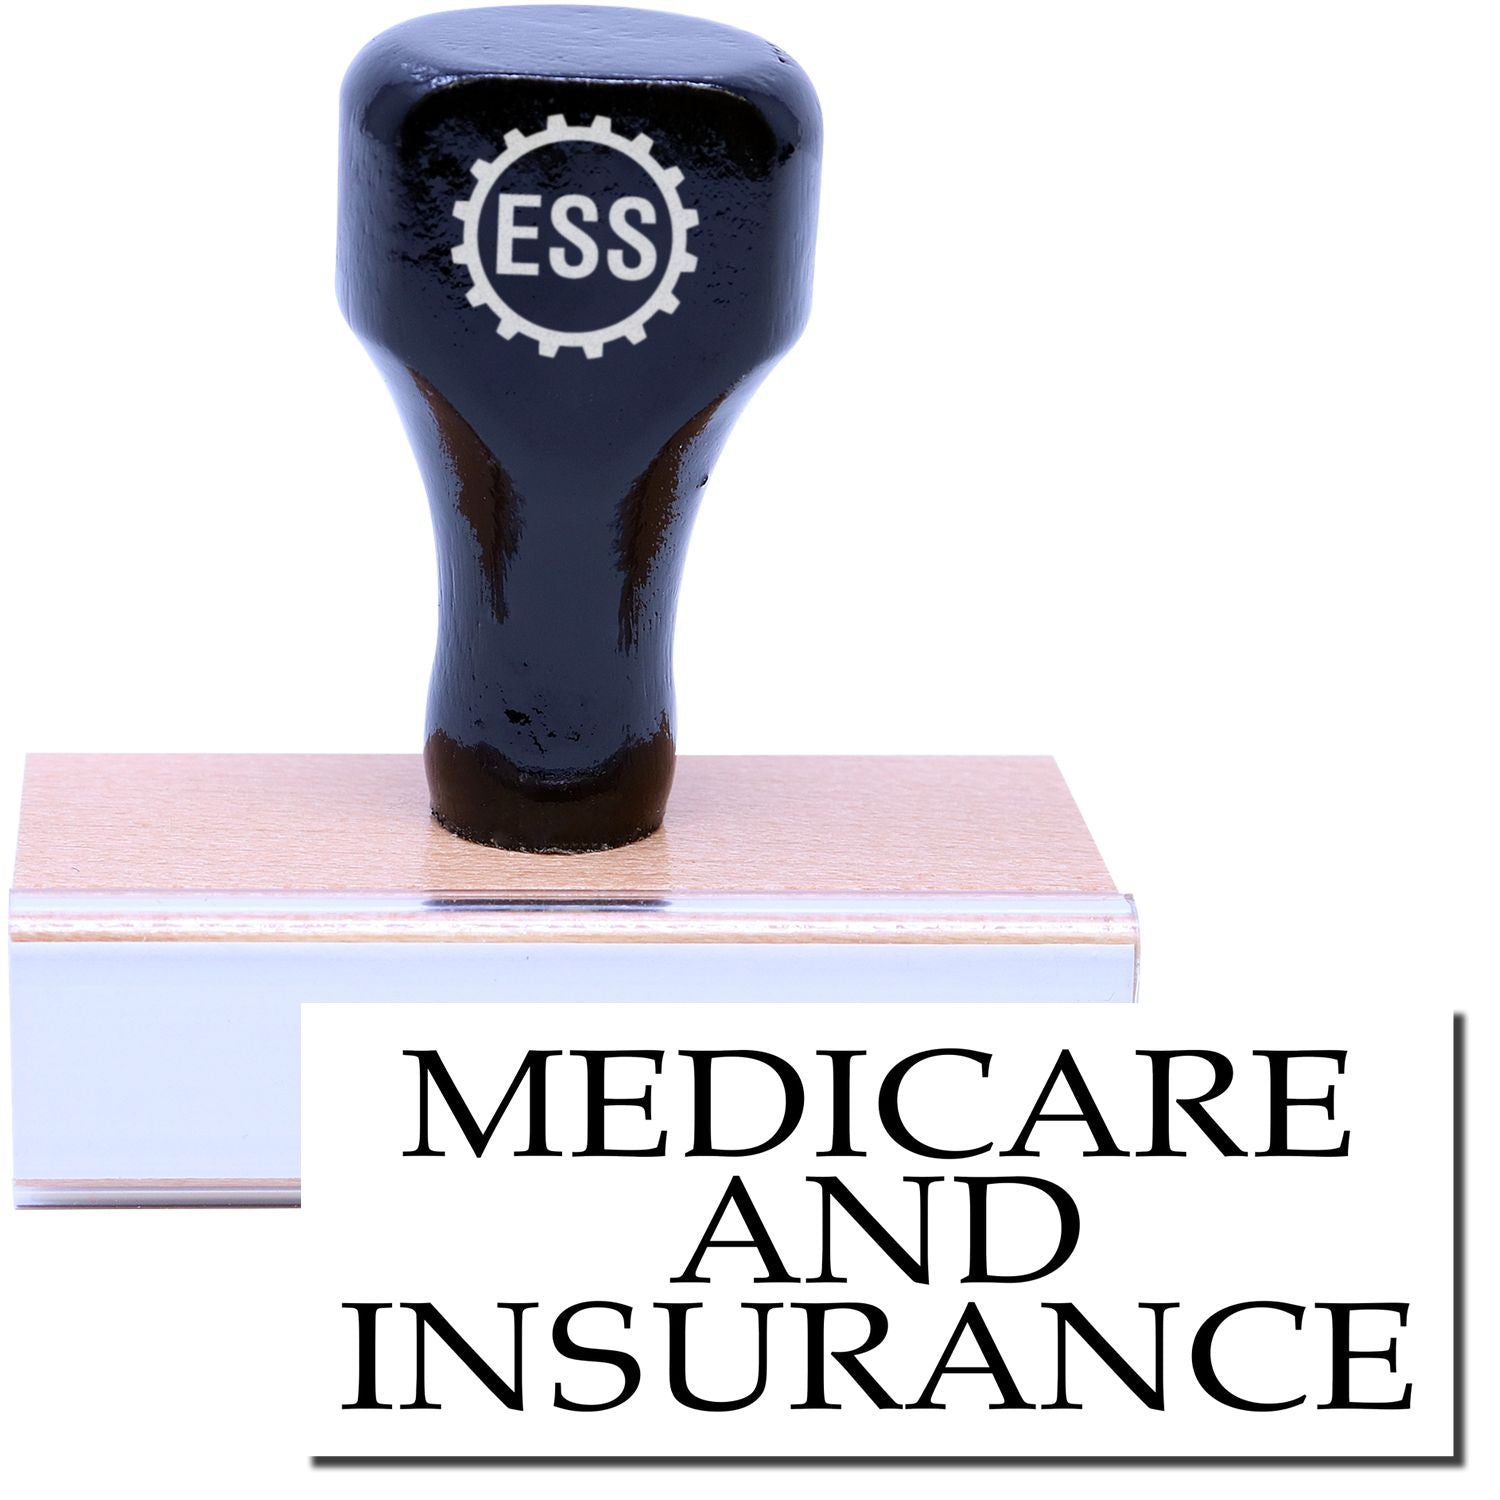 A stock office rubber stamp with a stamped image showing how the text "MEDICARE AND INSURANCE" is displayed after stamping.